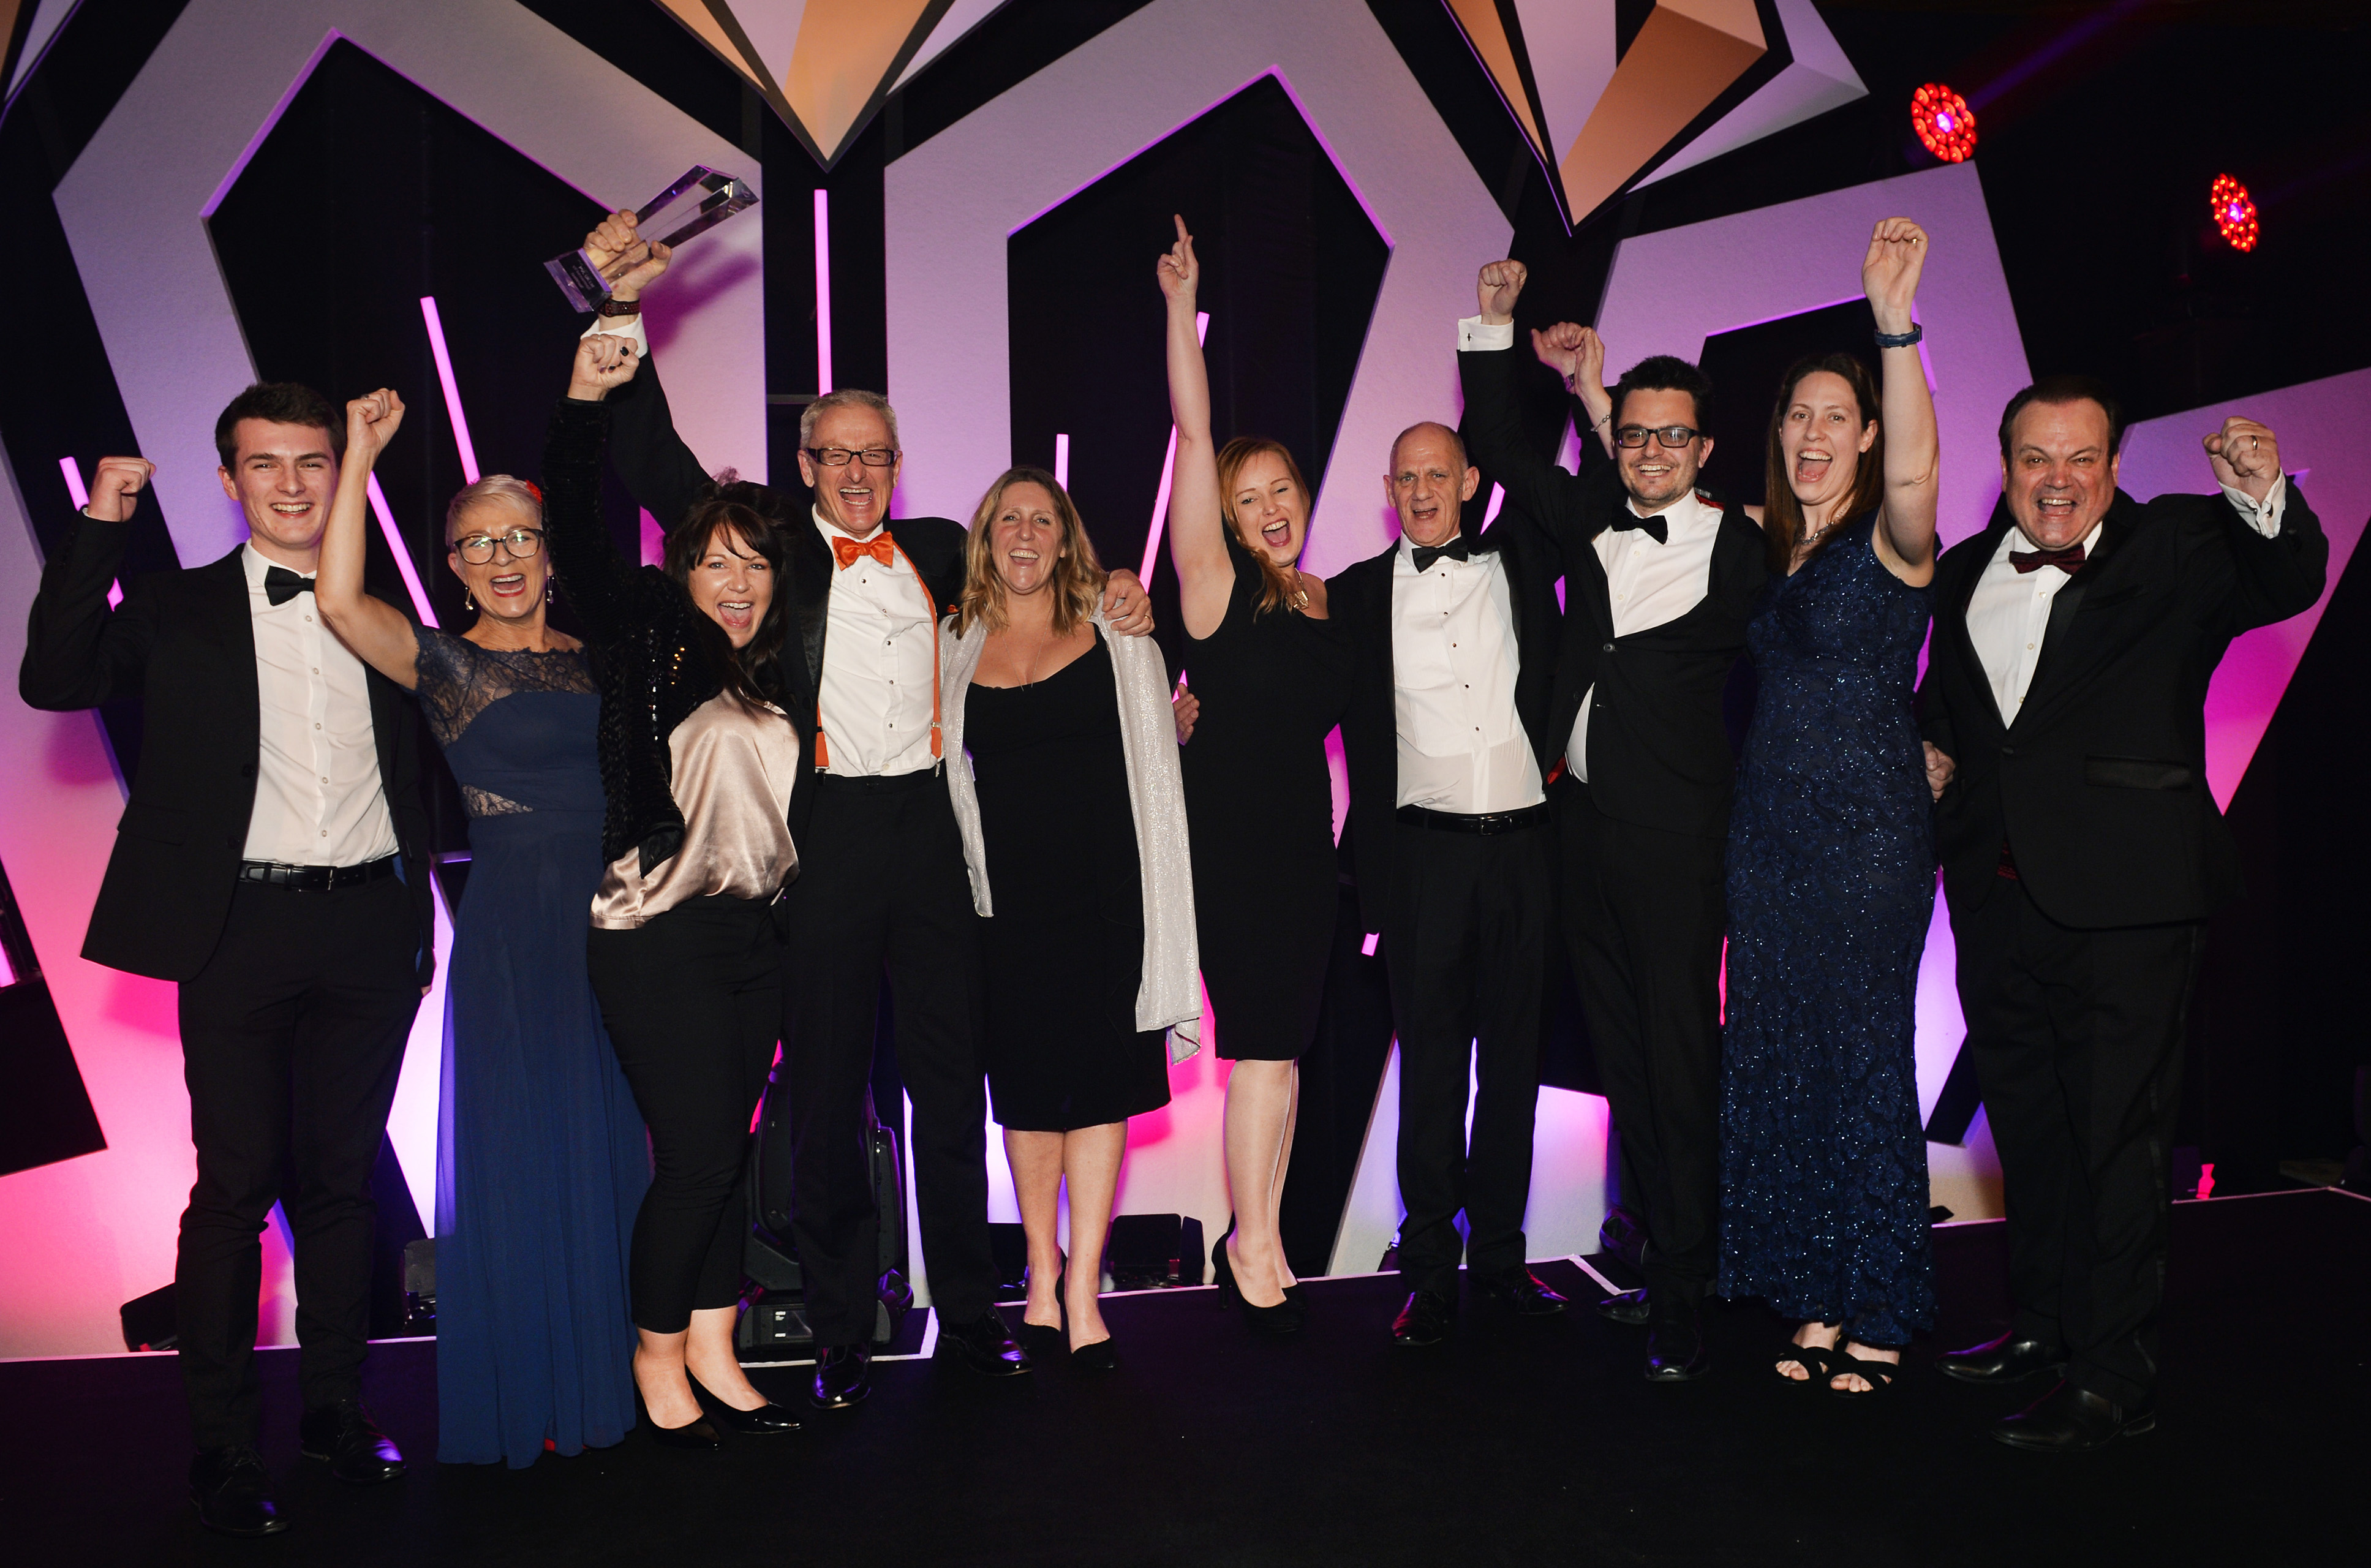 PVL are Double Award Winners at the Gatwick Diamond Business Awards 2019